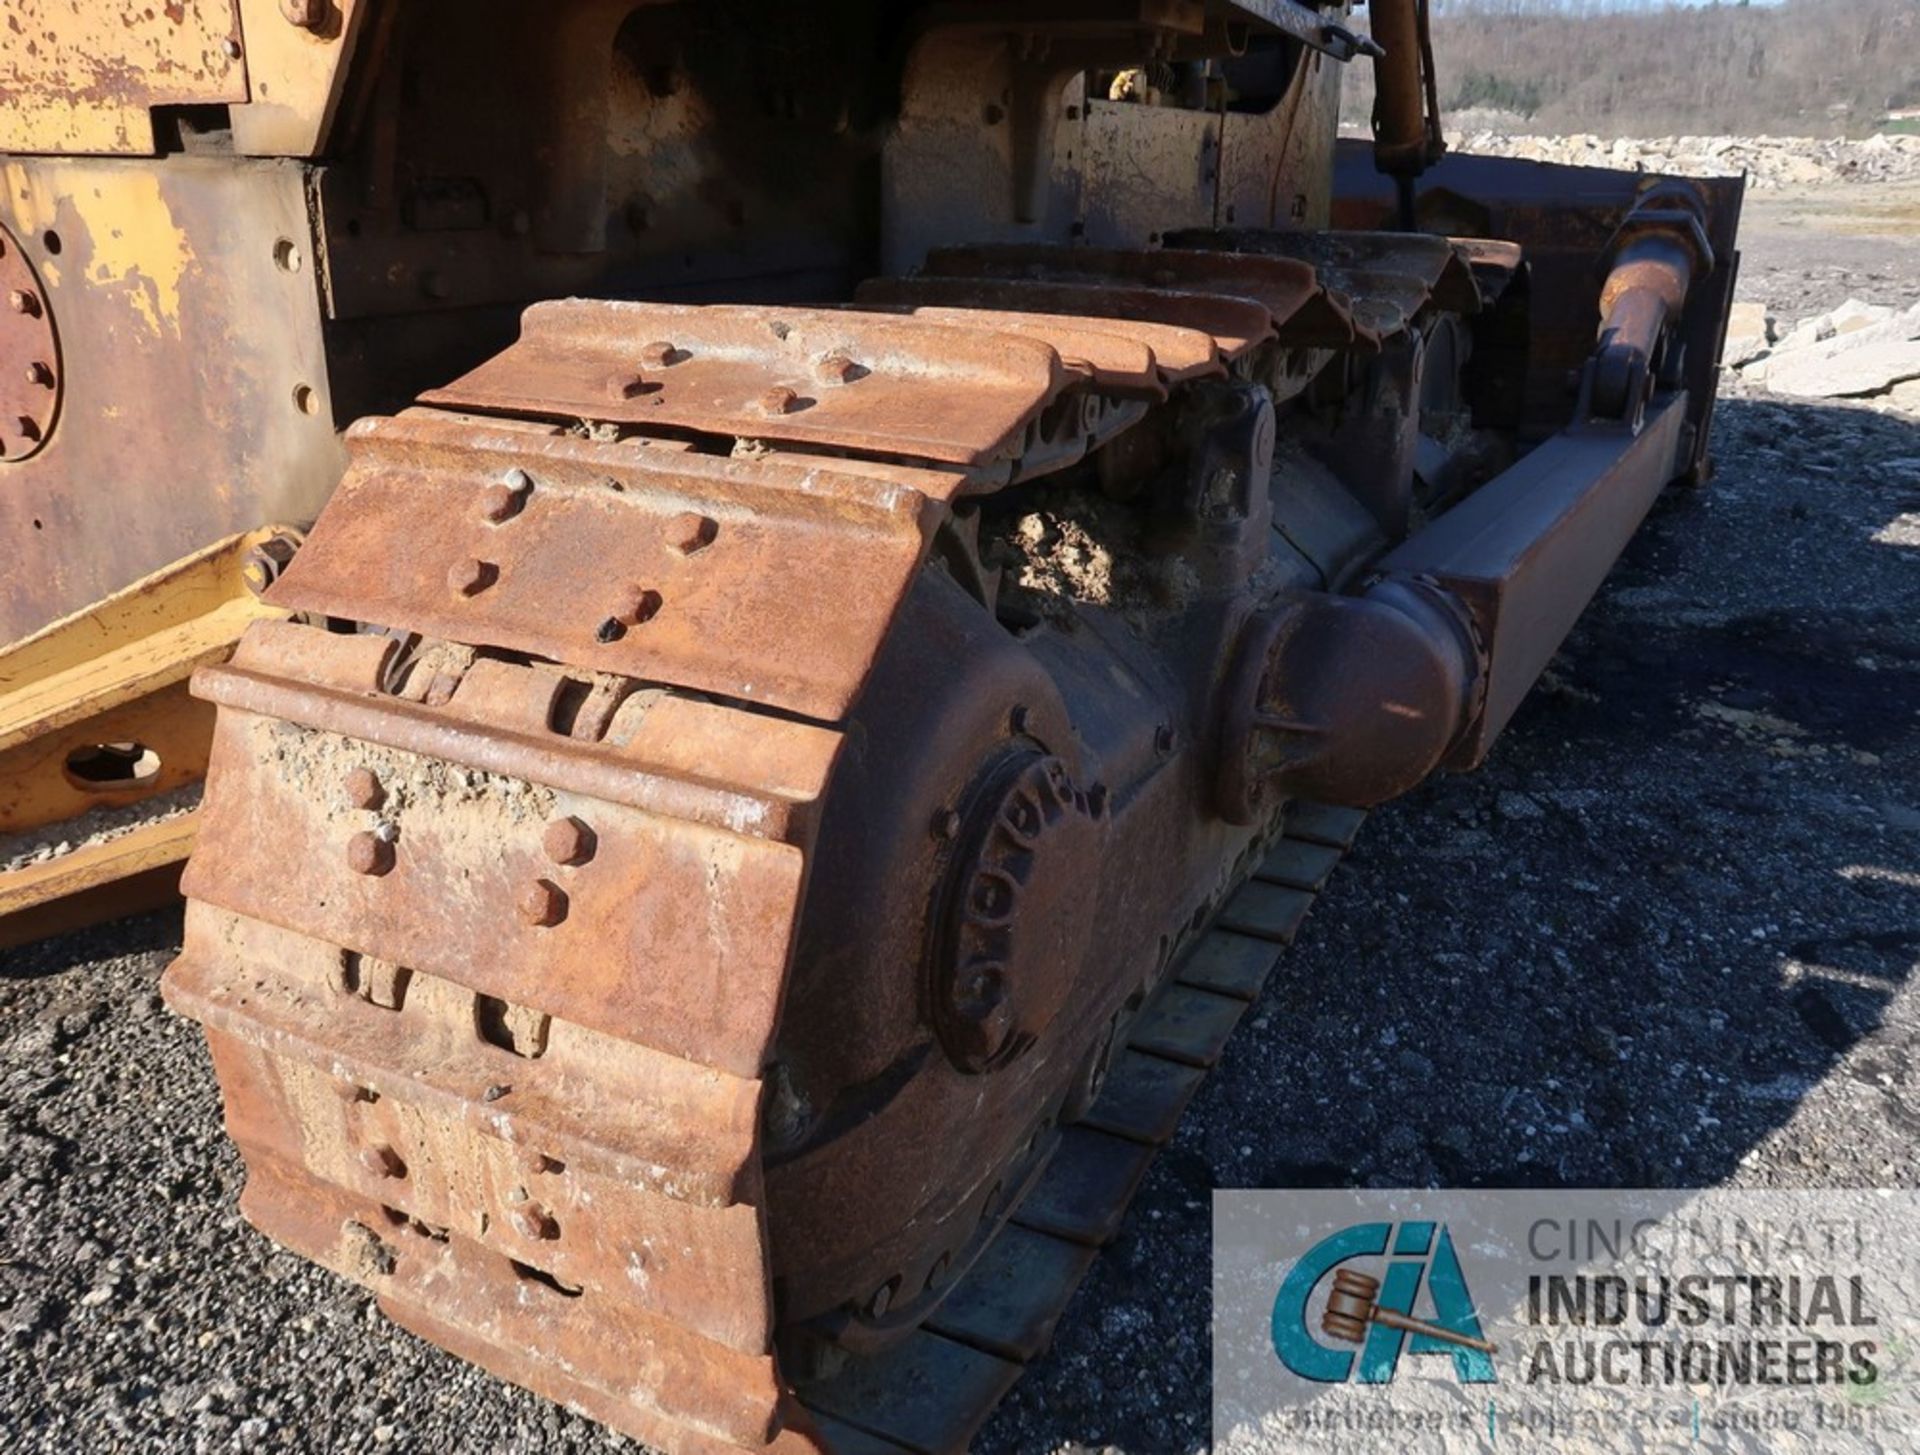 CATERPILLAR MODEL D8H CRAWLER DOZIER; S/N 46A28203 (NEW 1973), 53" X 148" BLADE, 24" TRACKS, HOURS - Image 5 of 18